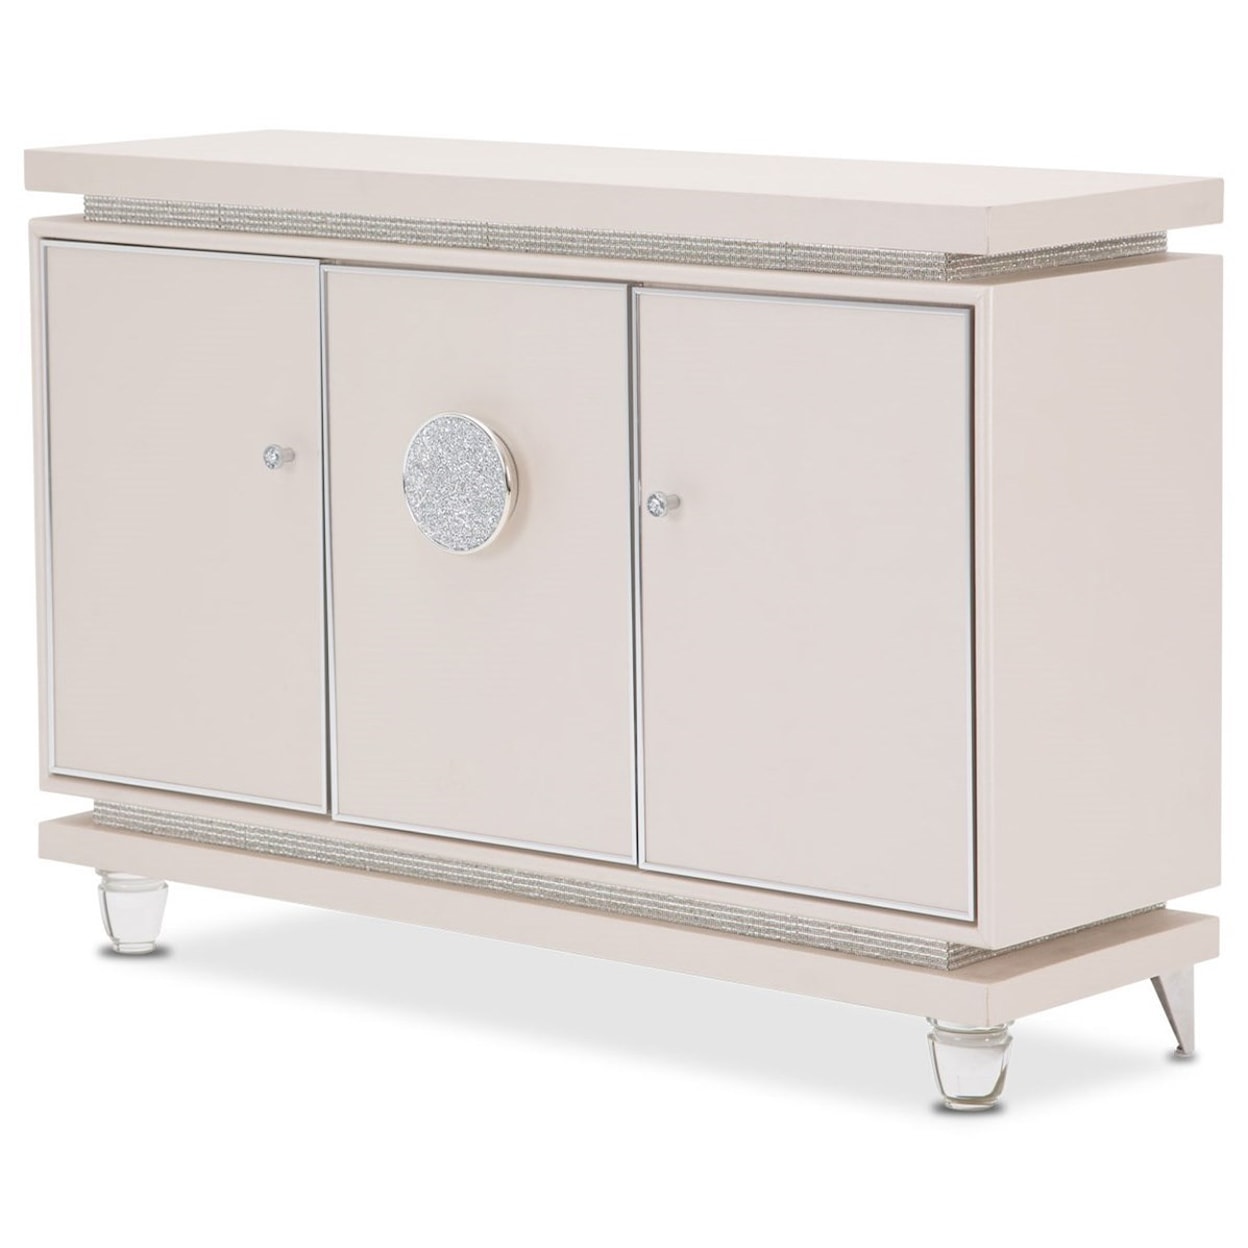 Michael Amini Glimmering Heights Sideboard